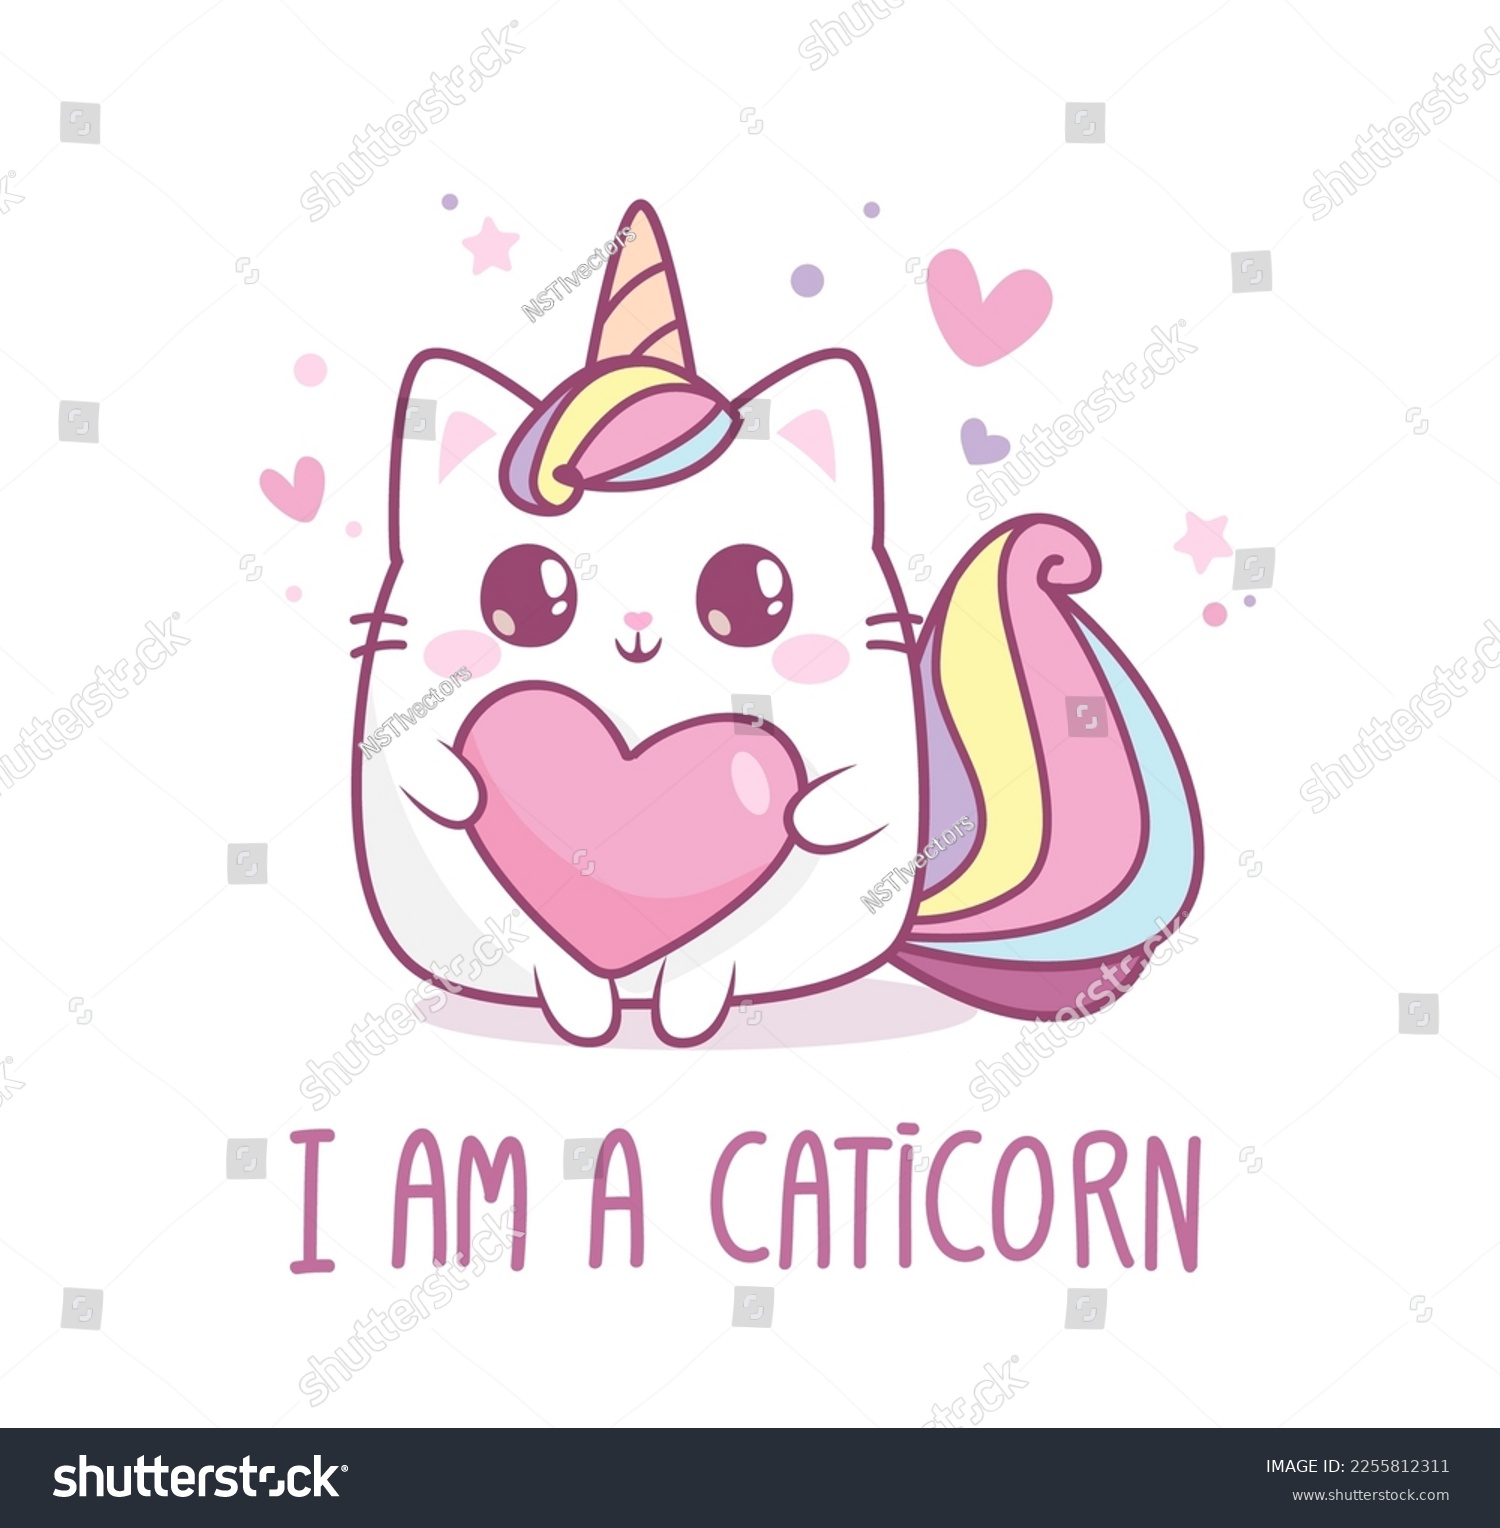 SVG of Baby Caticorn kitten or White Cat Unicorn hold heart with hand drawn slogan 